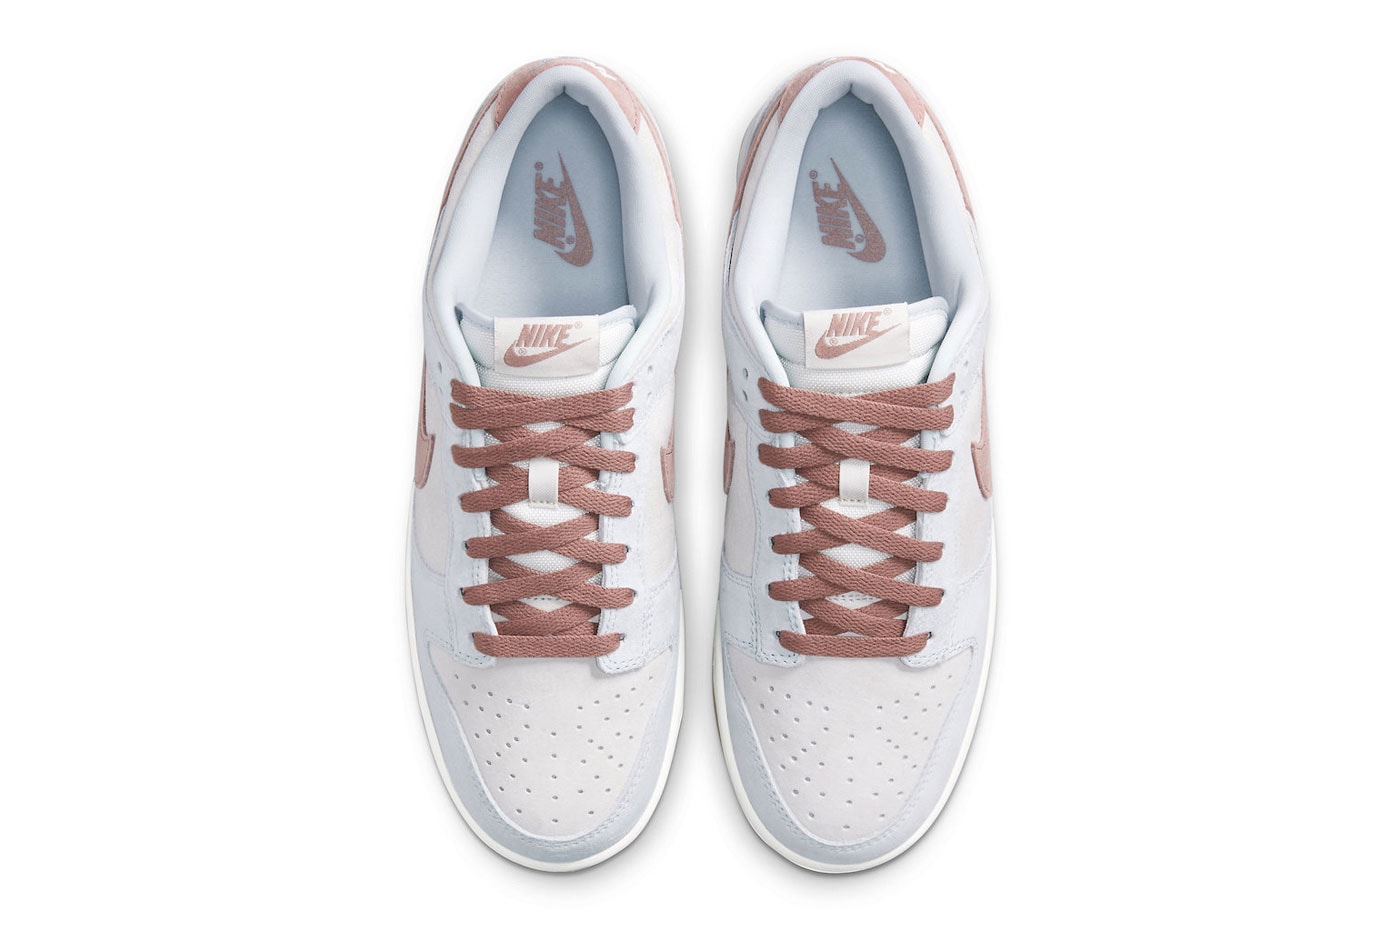 Nike dunk high low fossil rose DH7577 001 pink white gum brown light blue release info